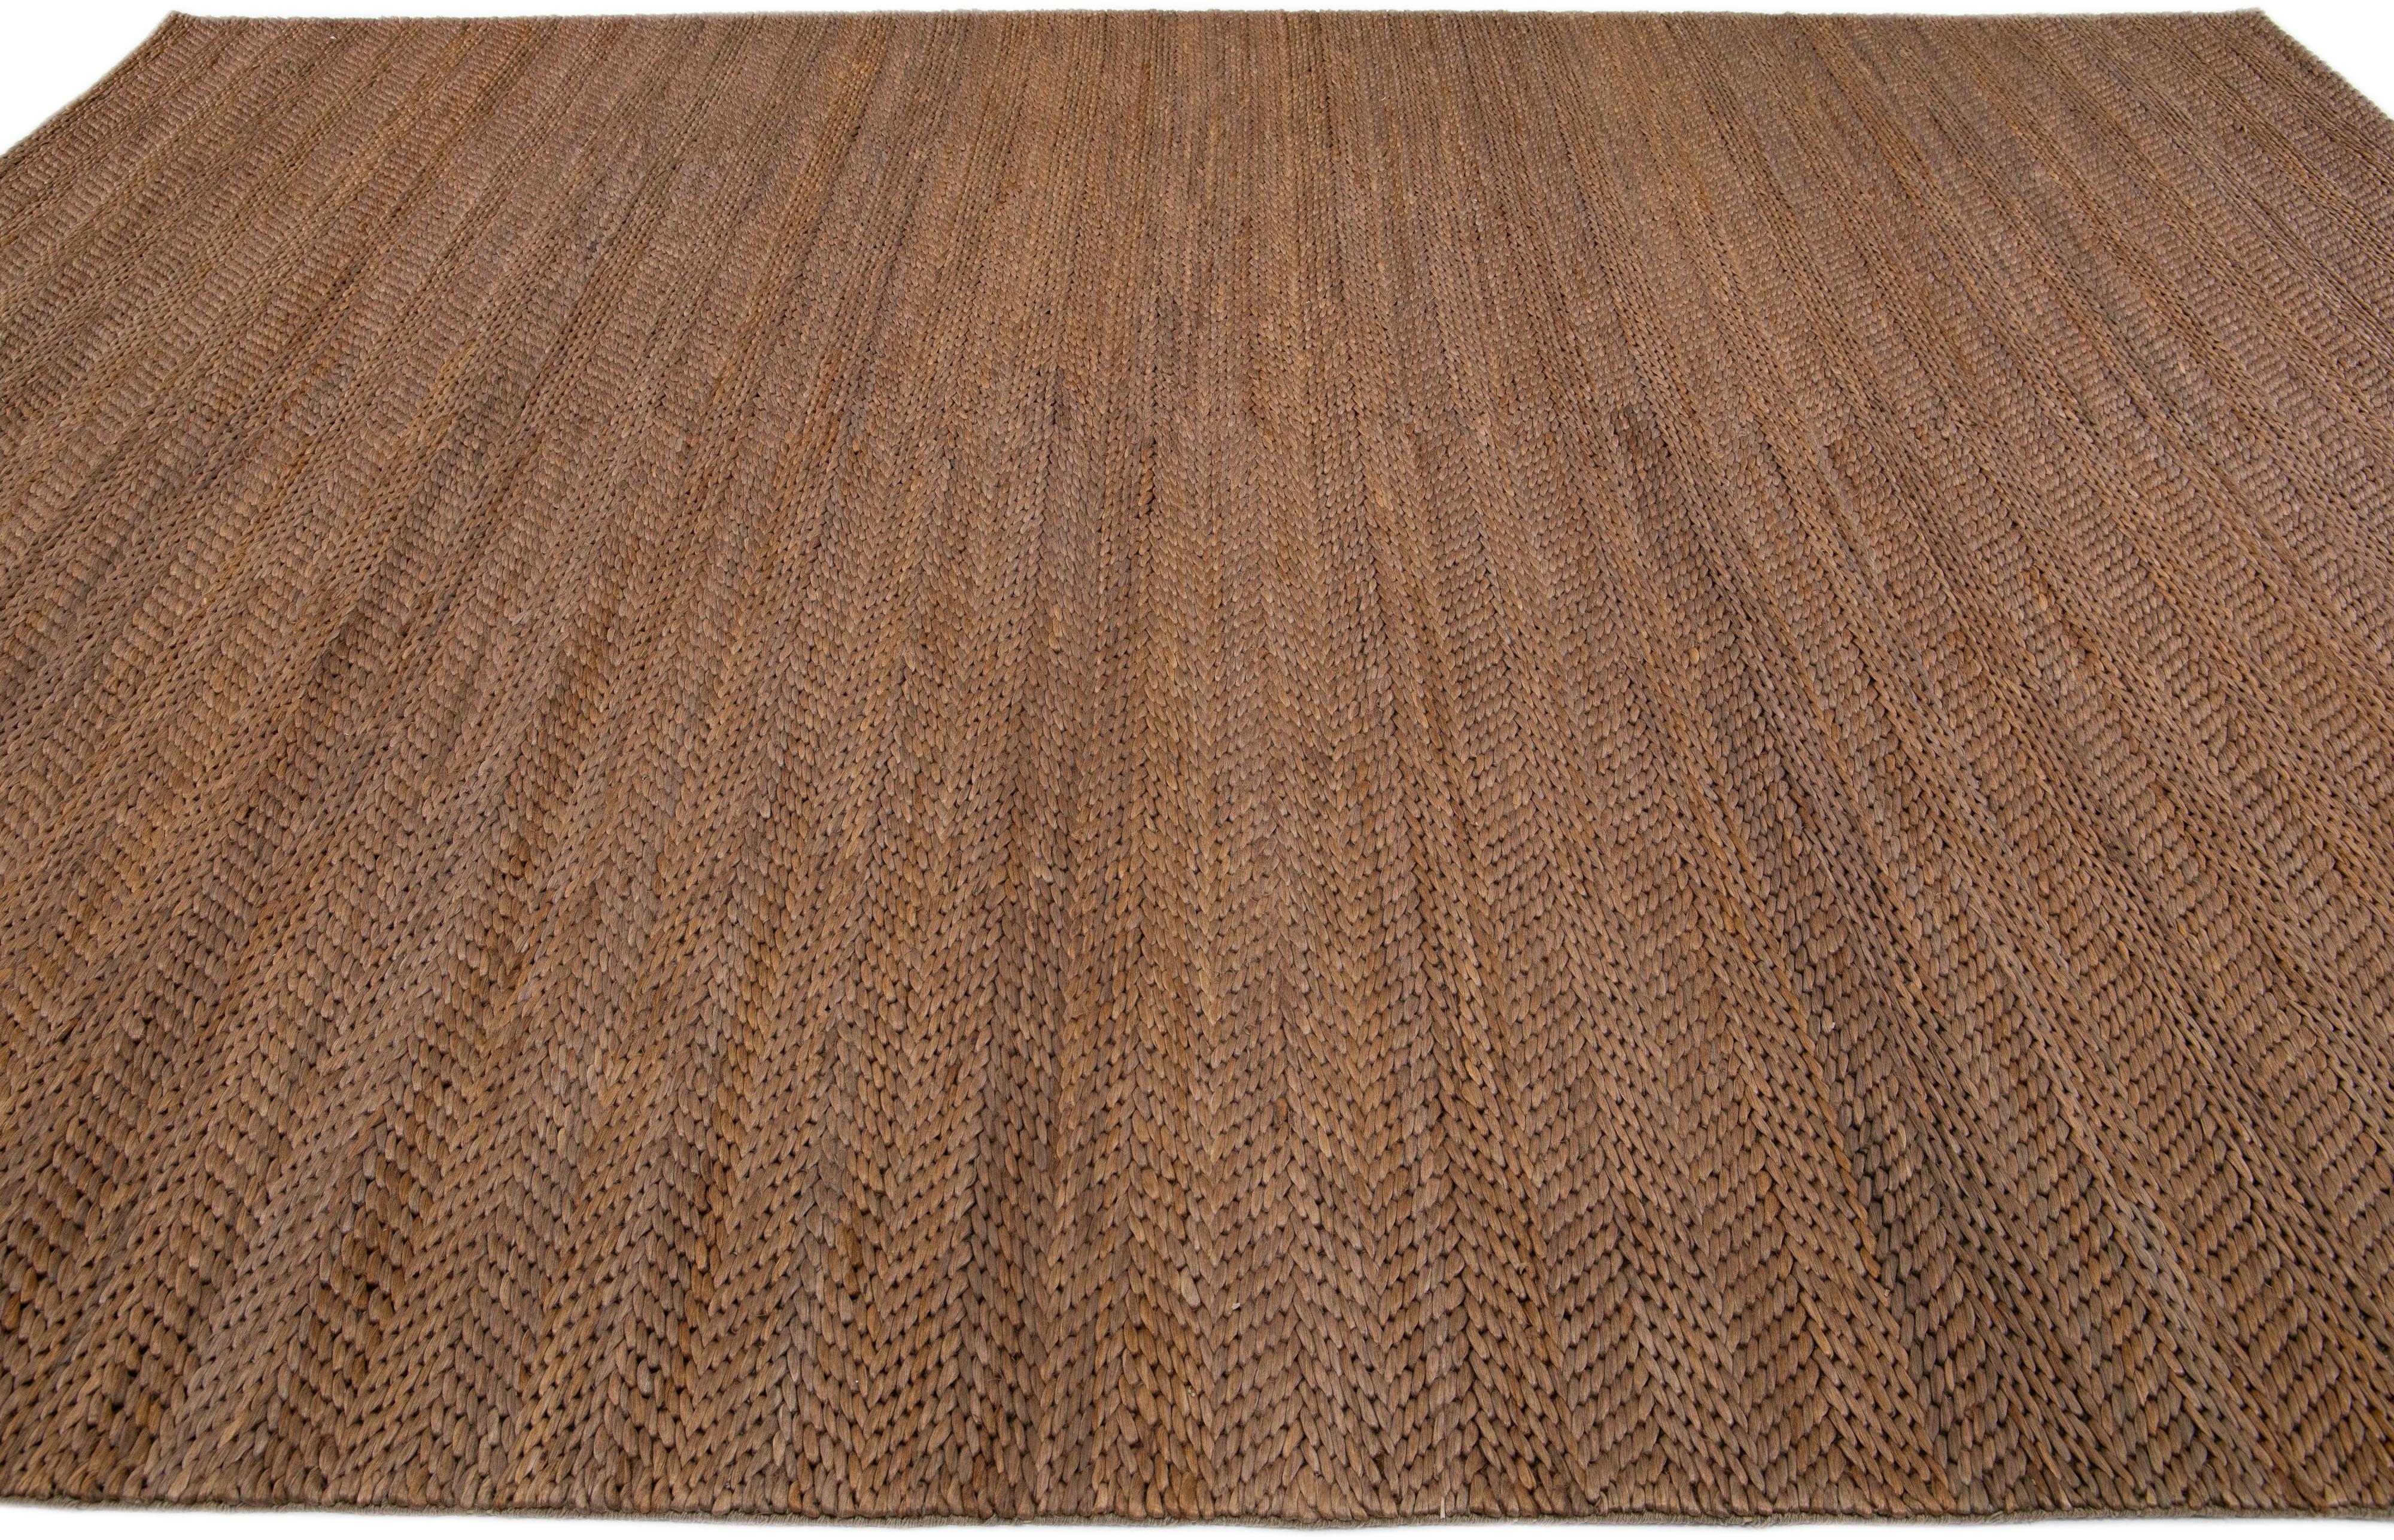 Indian Modern Natural Texture Hand Woven Brown Jute & Cotton Area Rug For Sale